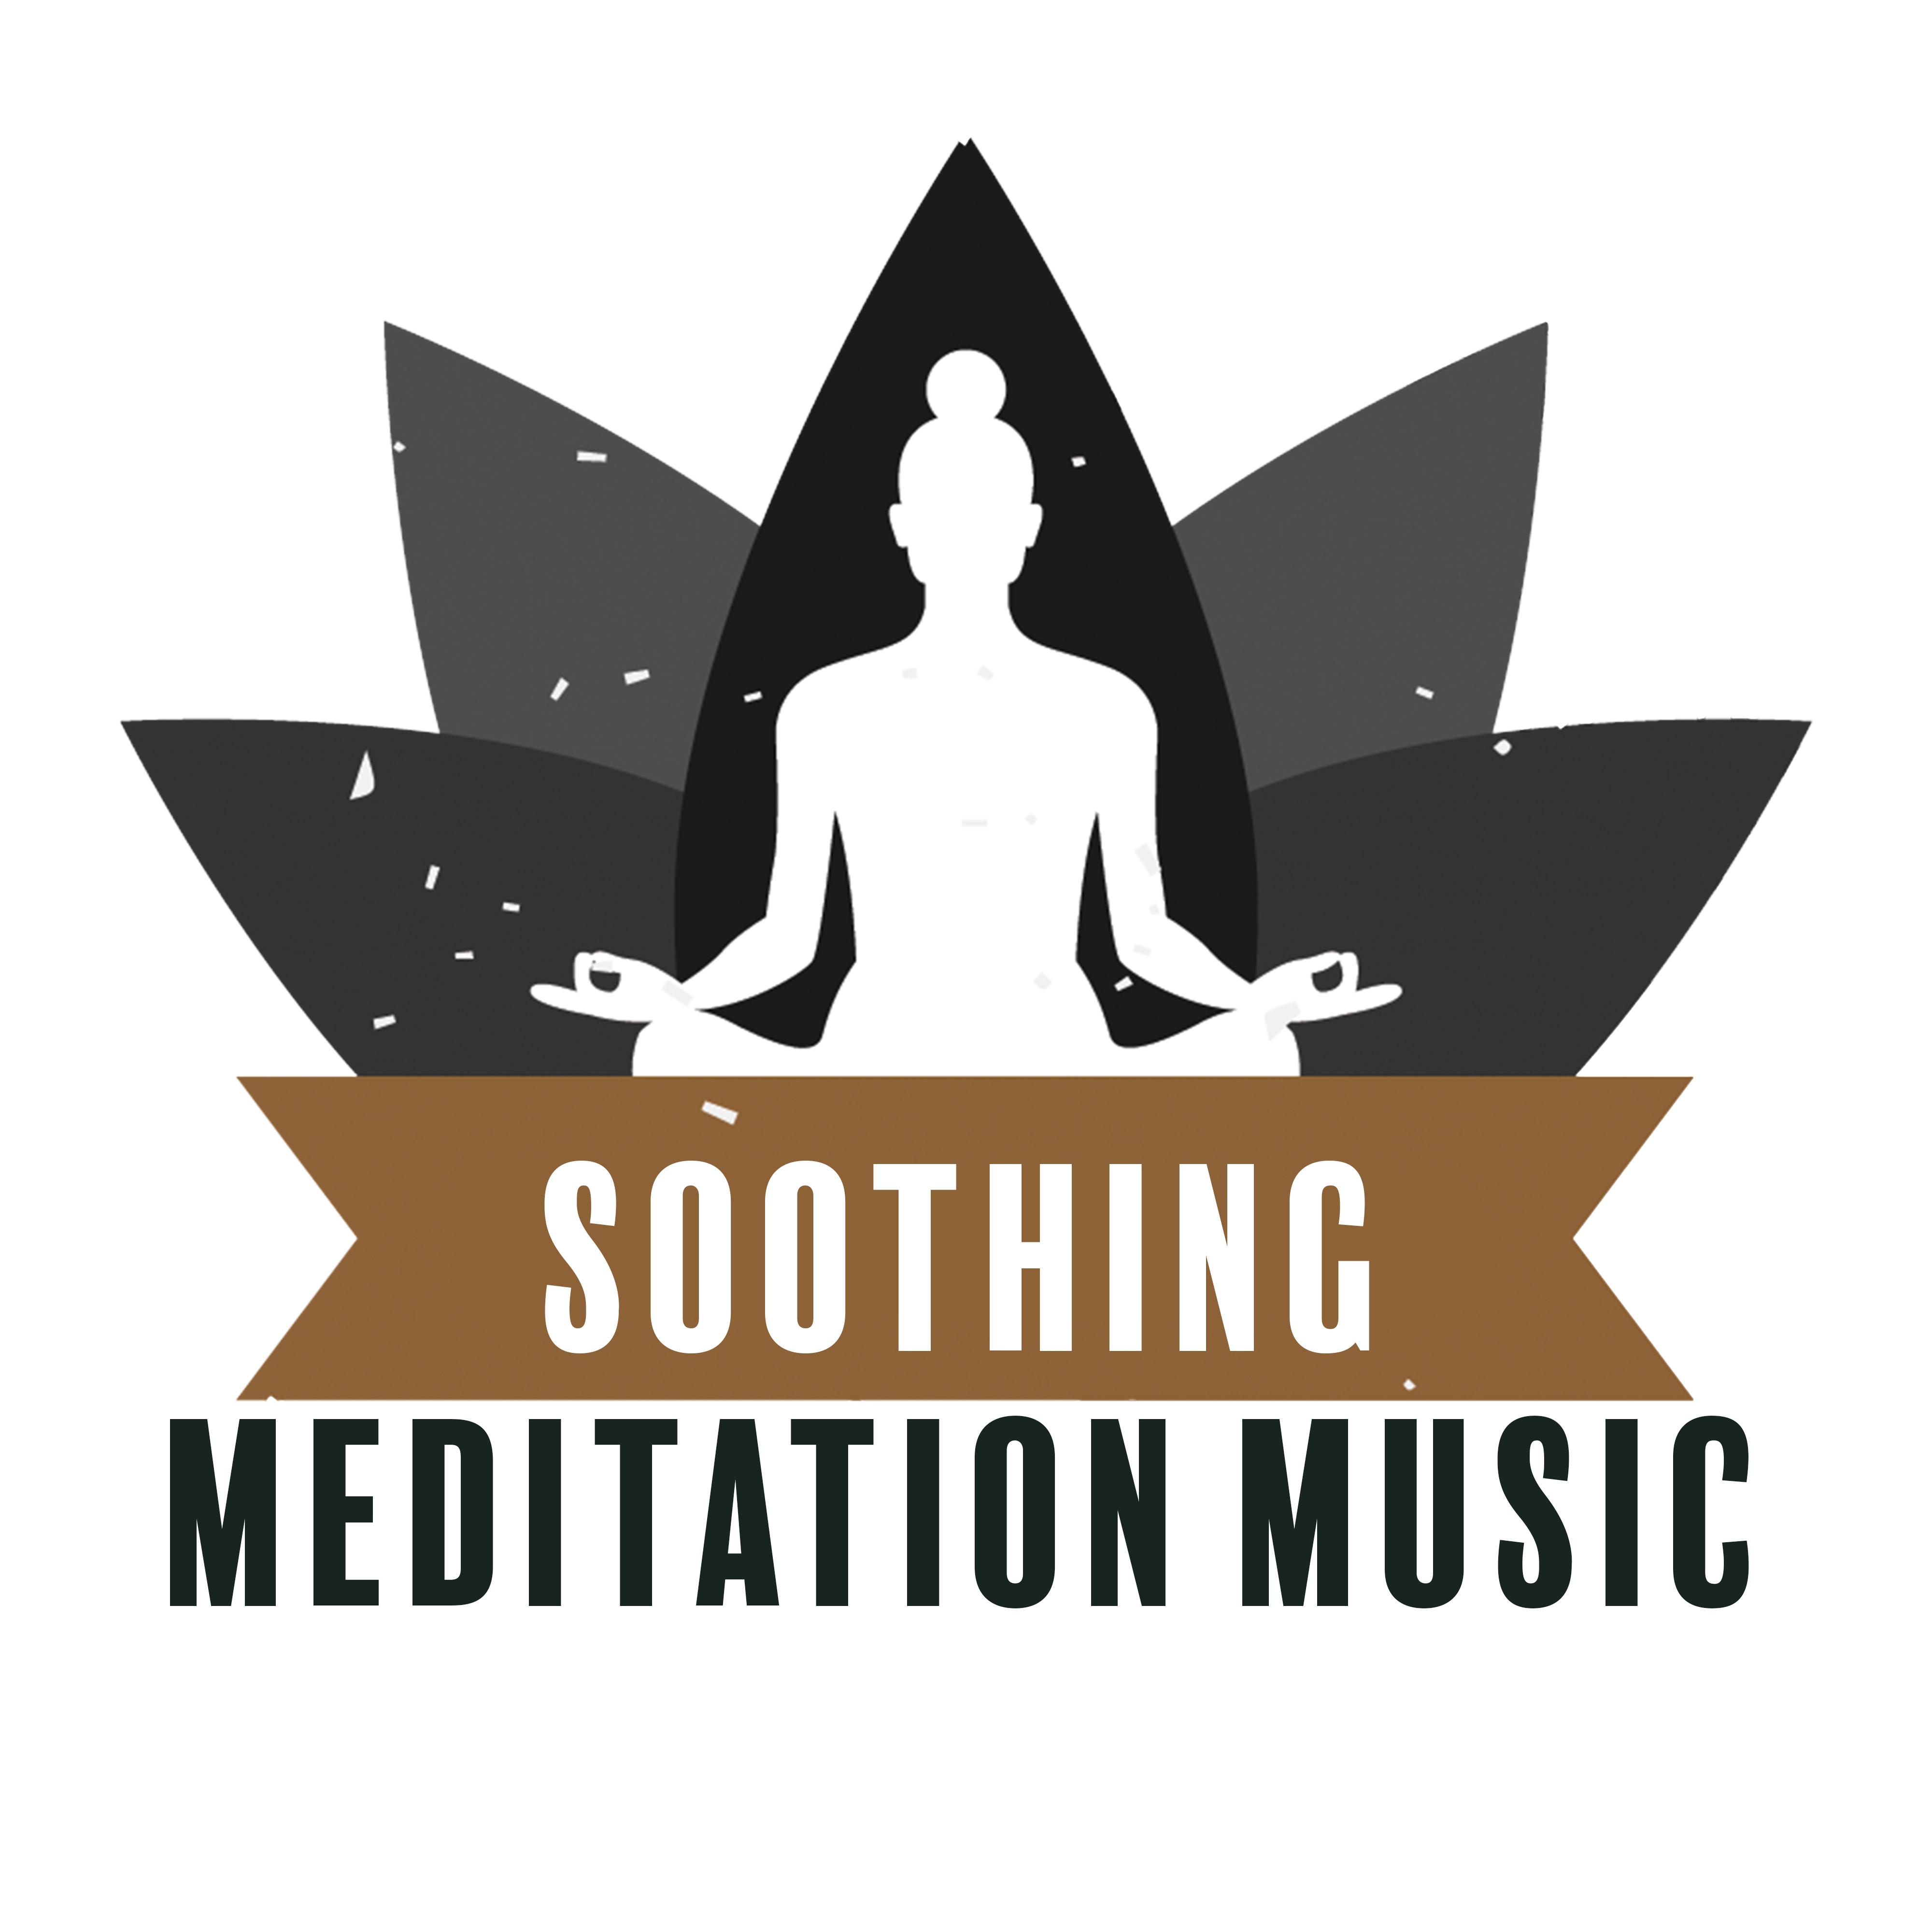 Soothing Meditation Music